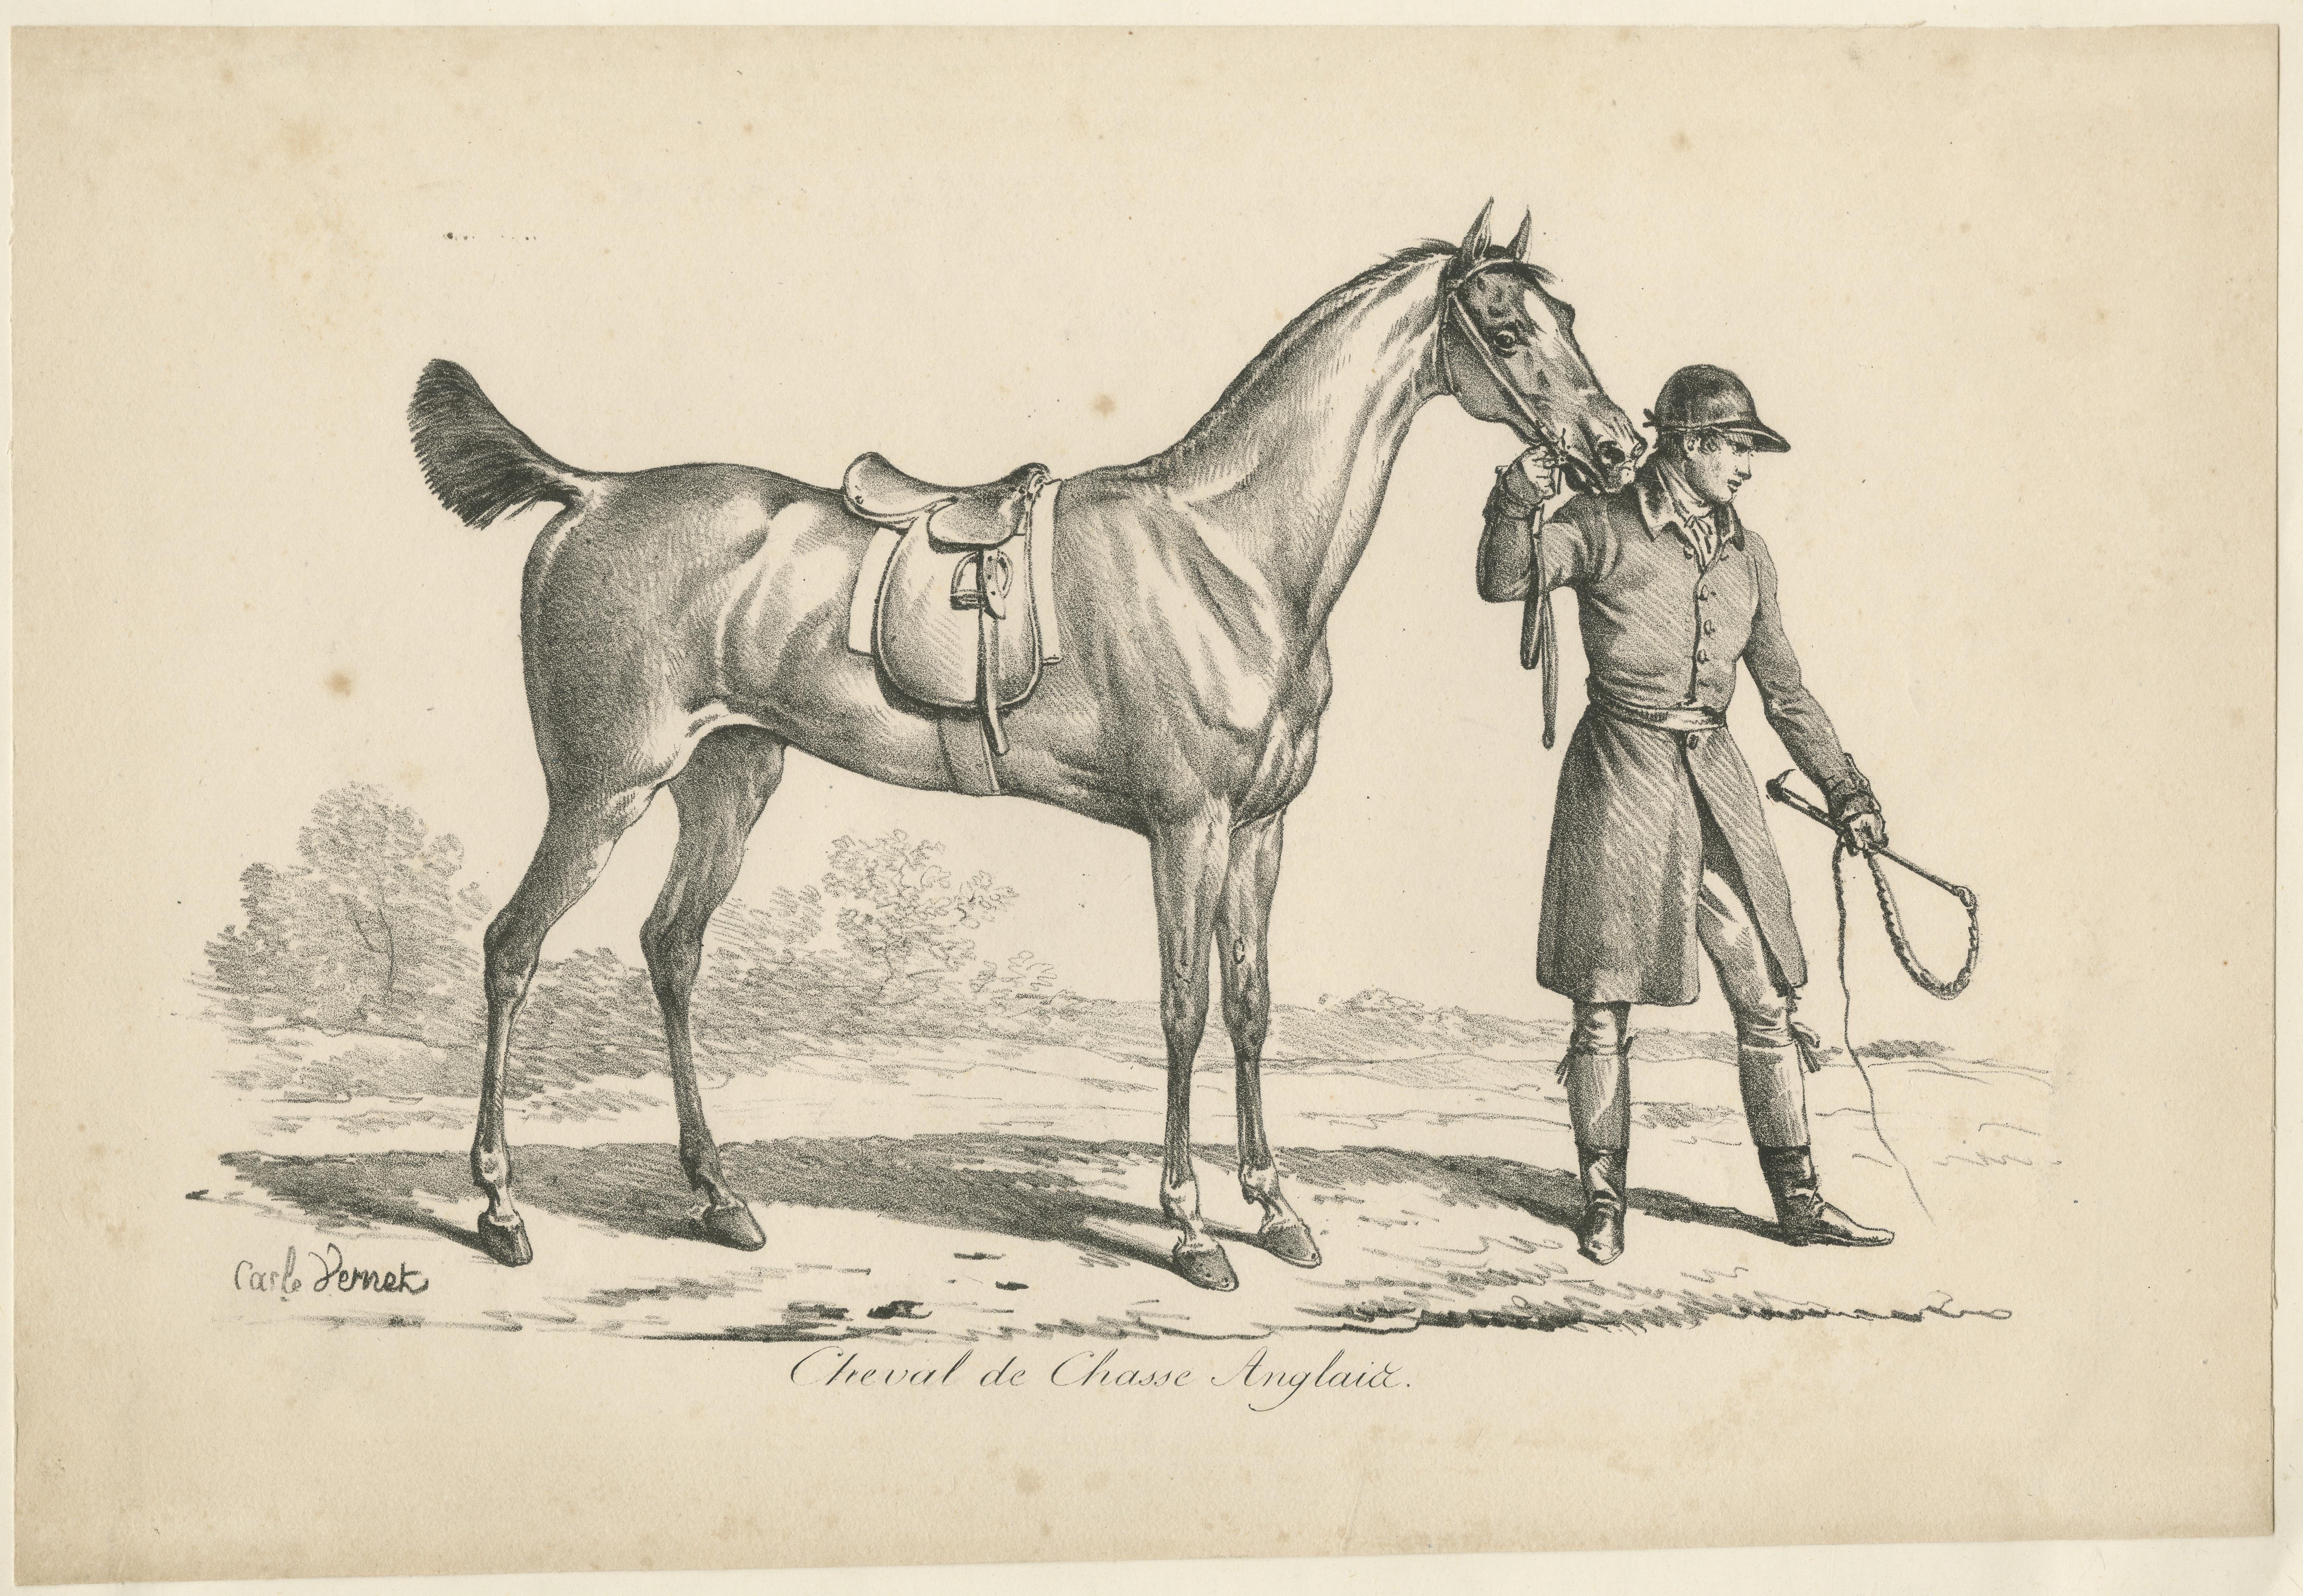 Antique print titled 'Cheval de Chasse Anglaise'. Original old print of a horse used for hunting in England. Made after a painting by Carle Vernet. Published circa 1890.